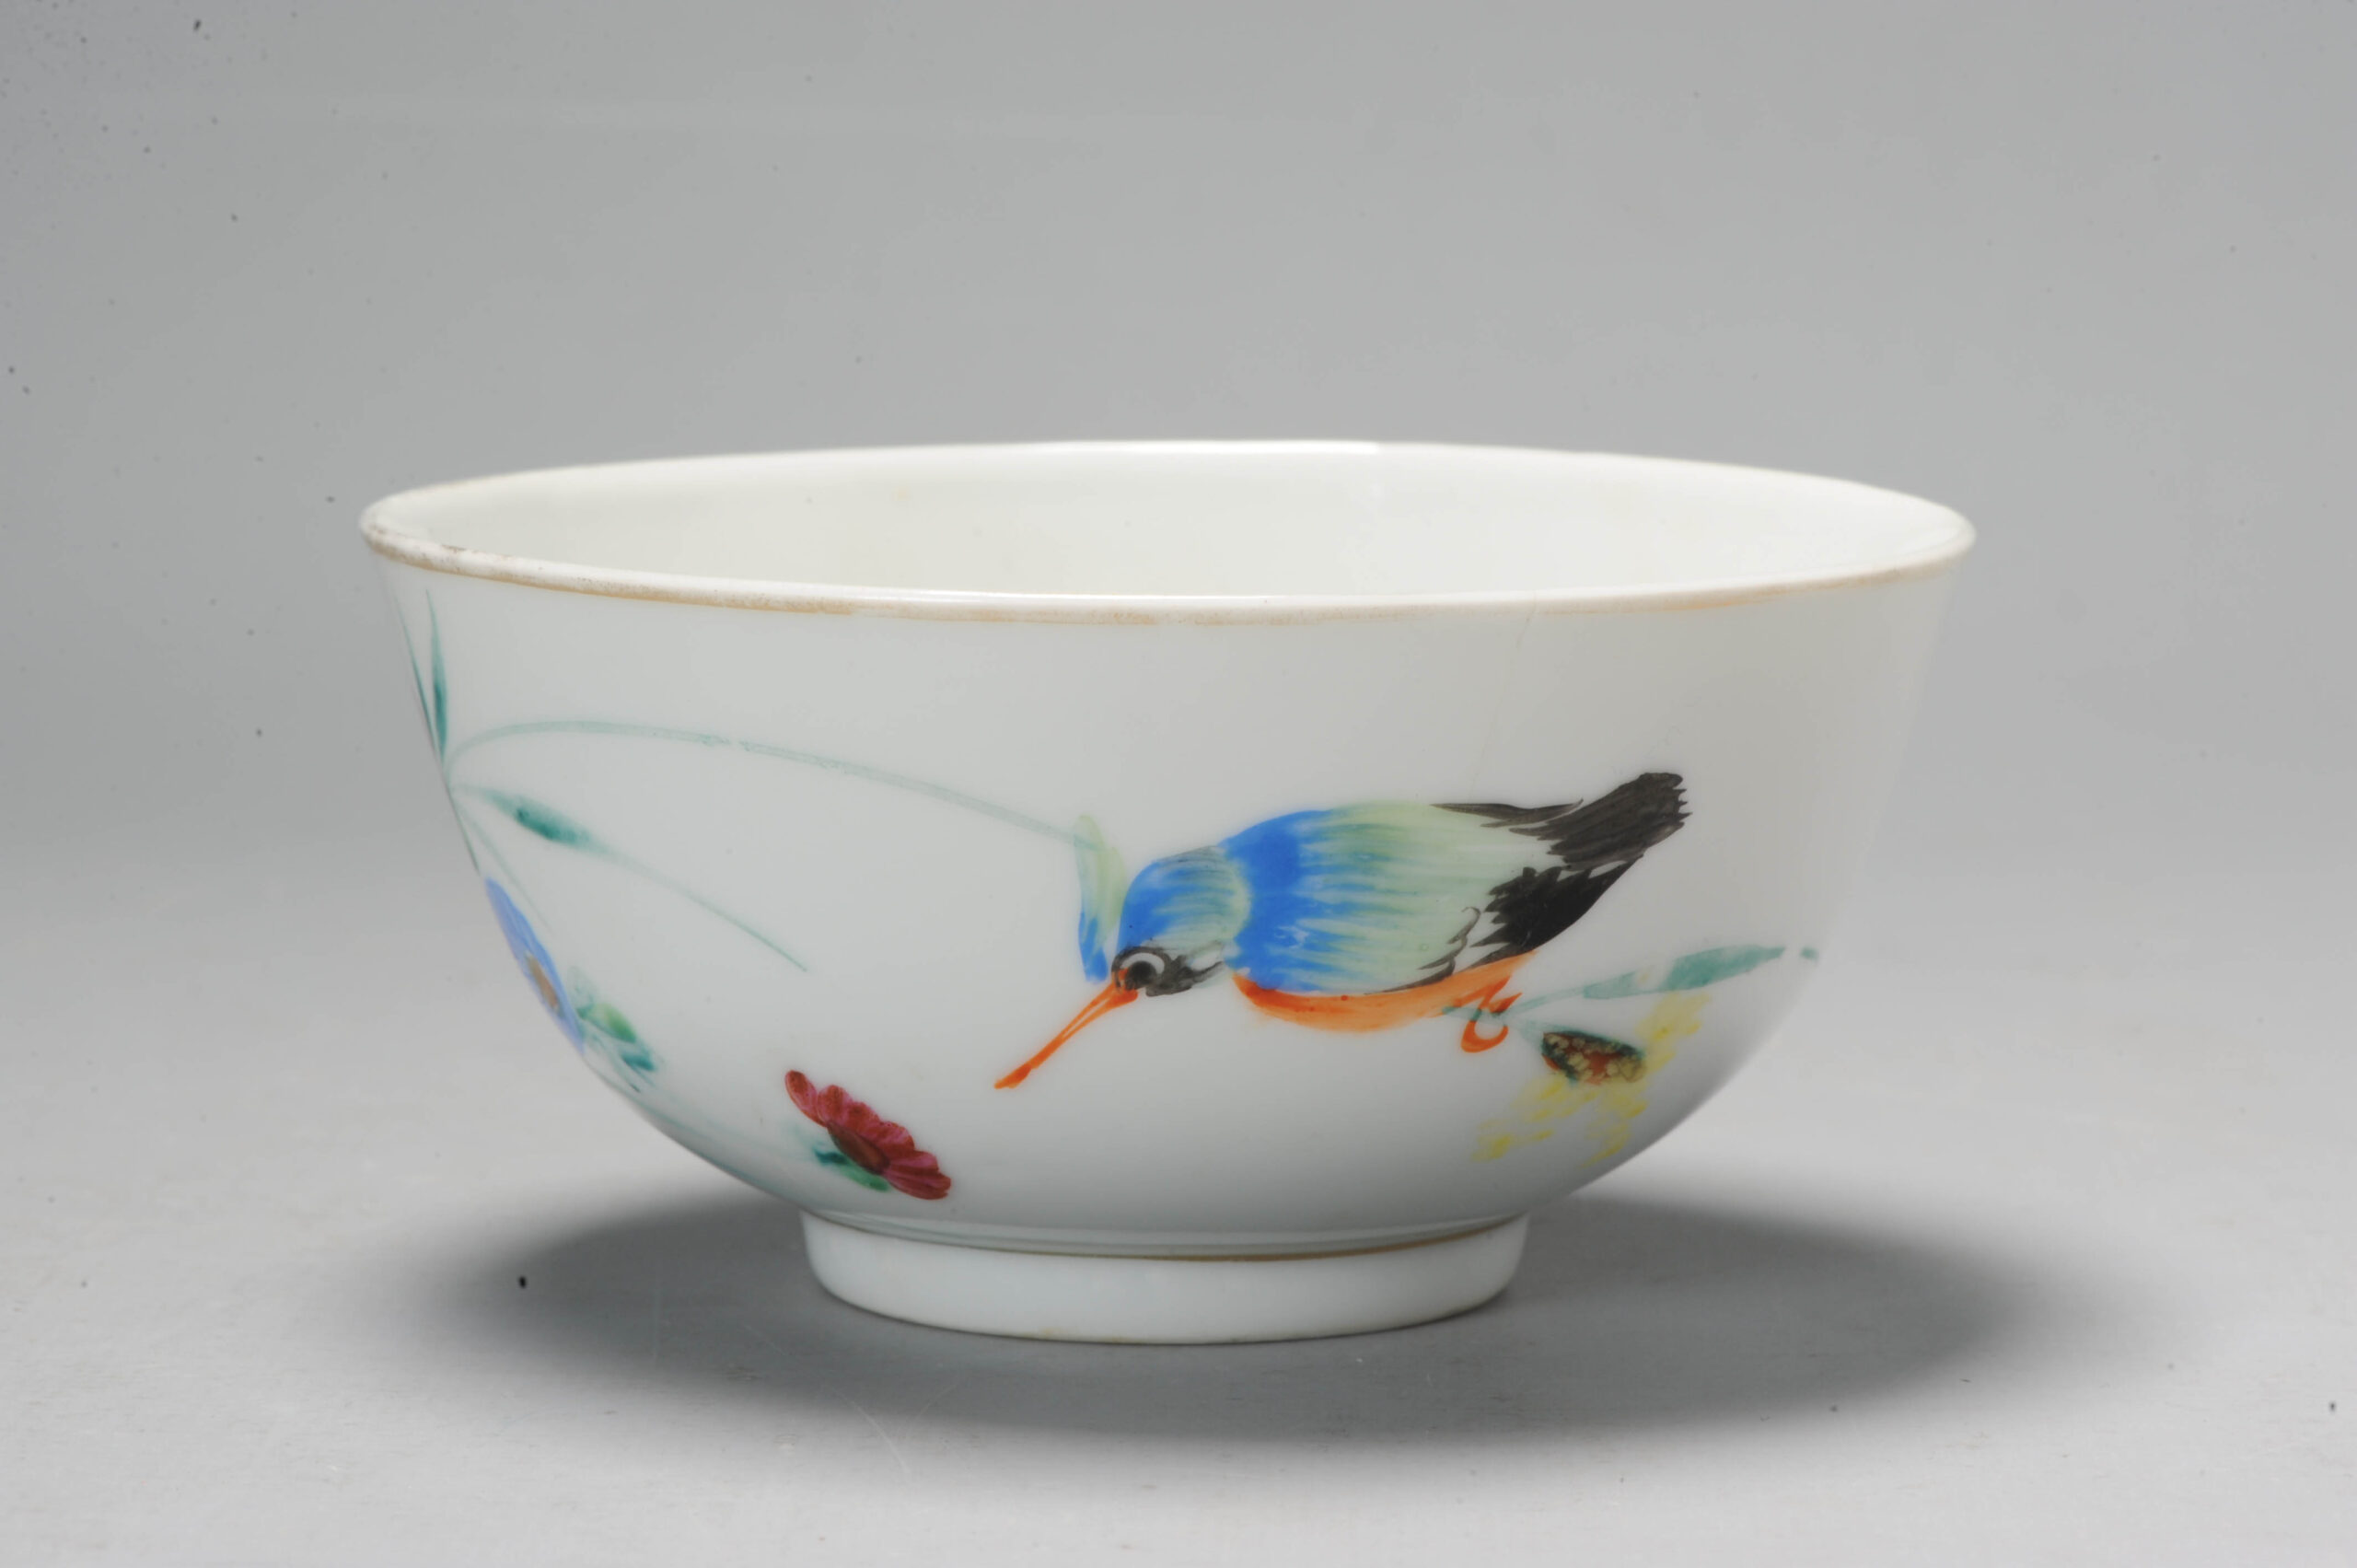 1137 Lovely Republic ProC 1930s – 1950’s period bowl, marked at the base. A lovely Bird